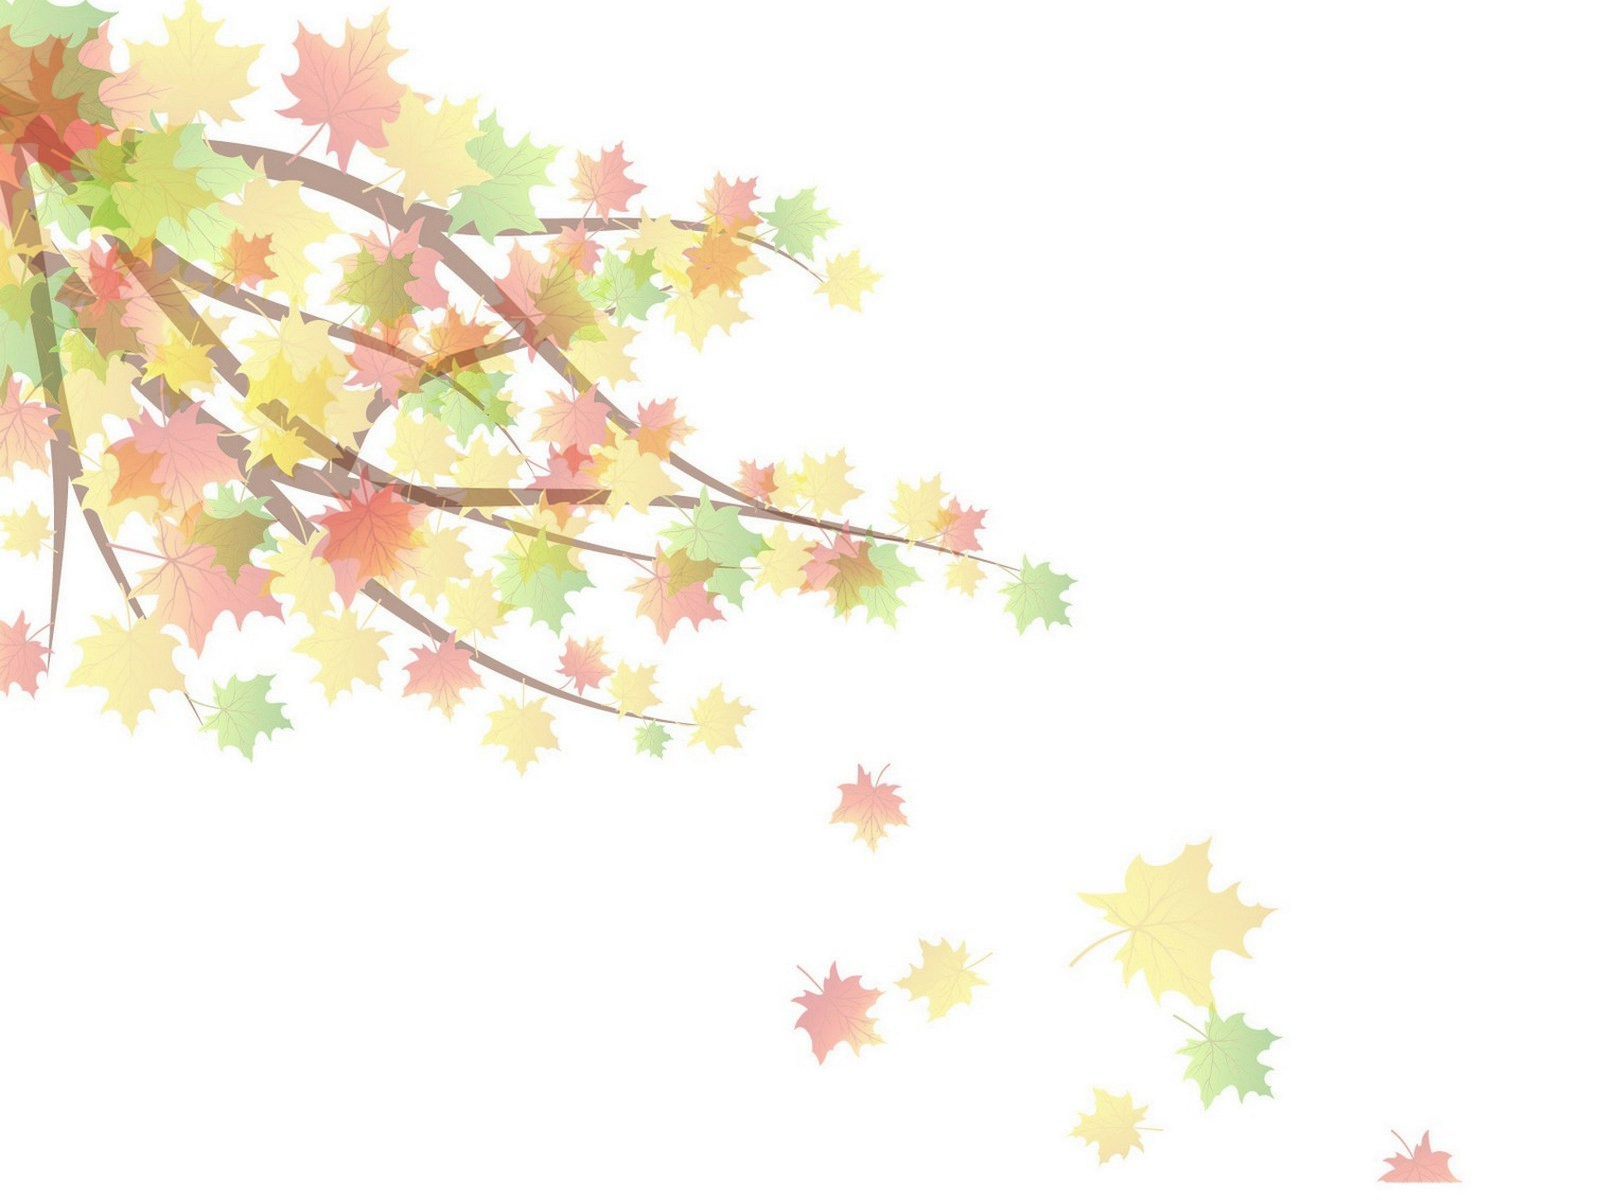 Autumn Period PPT Backgrounds